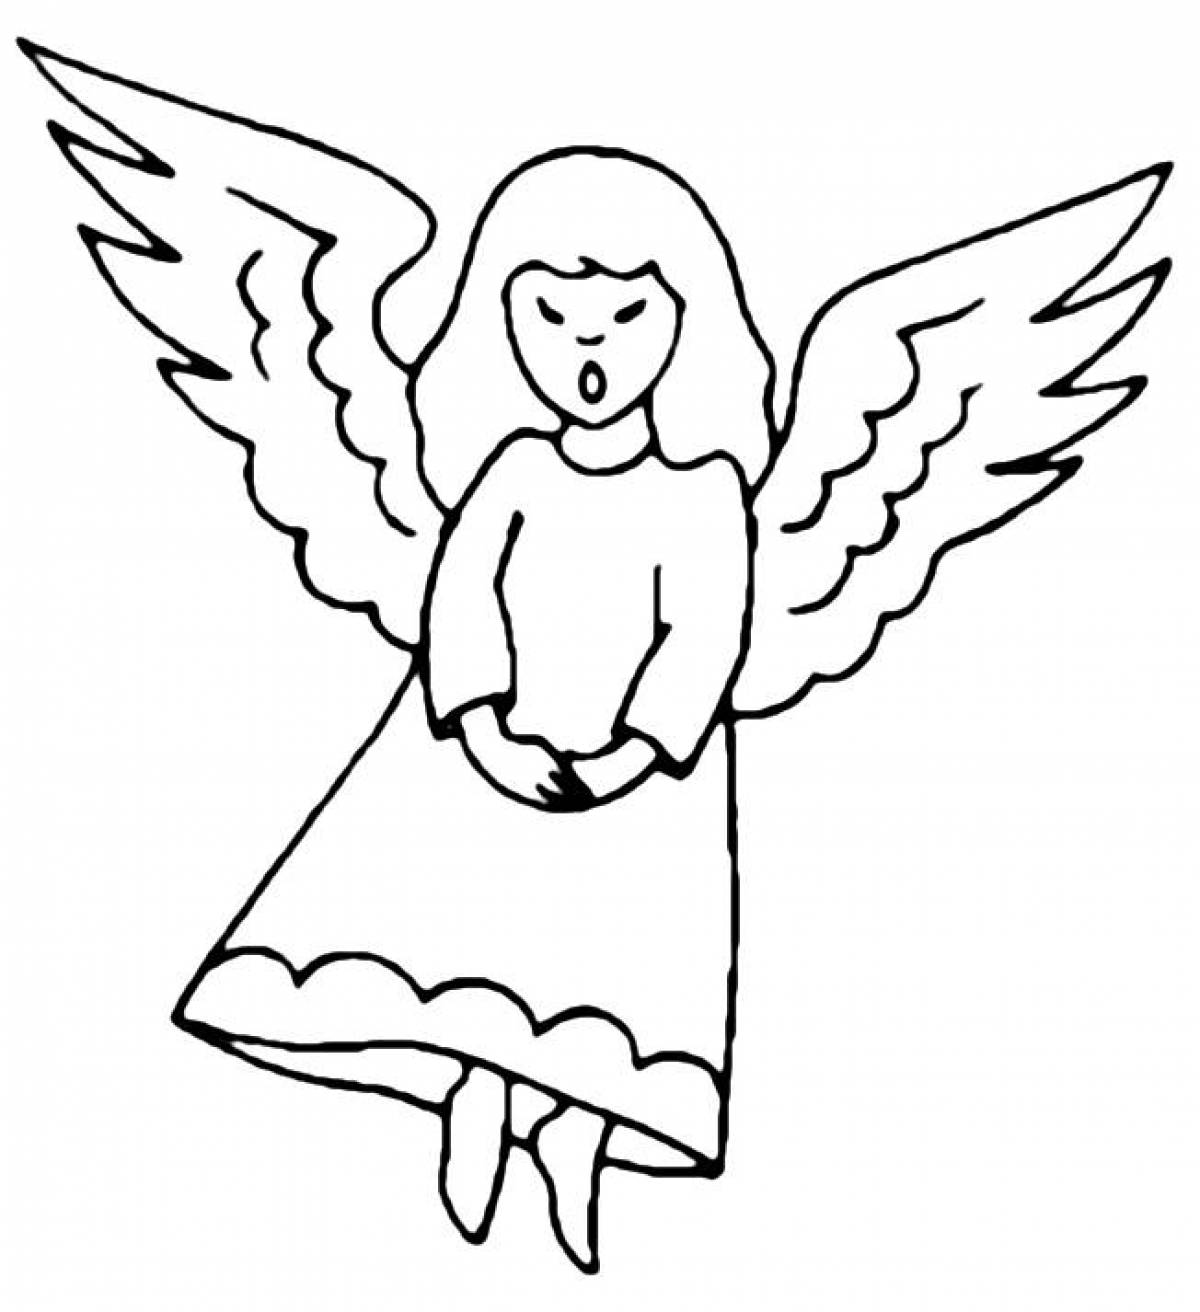 Coloring book fluttering angel with wings for children